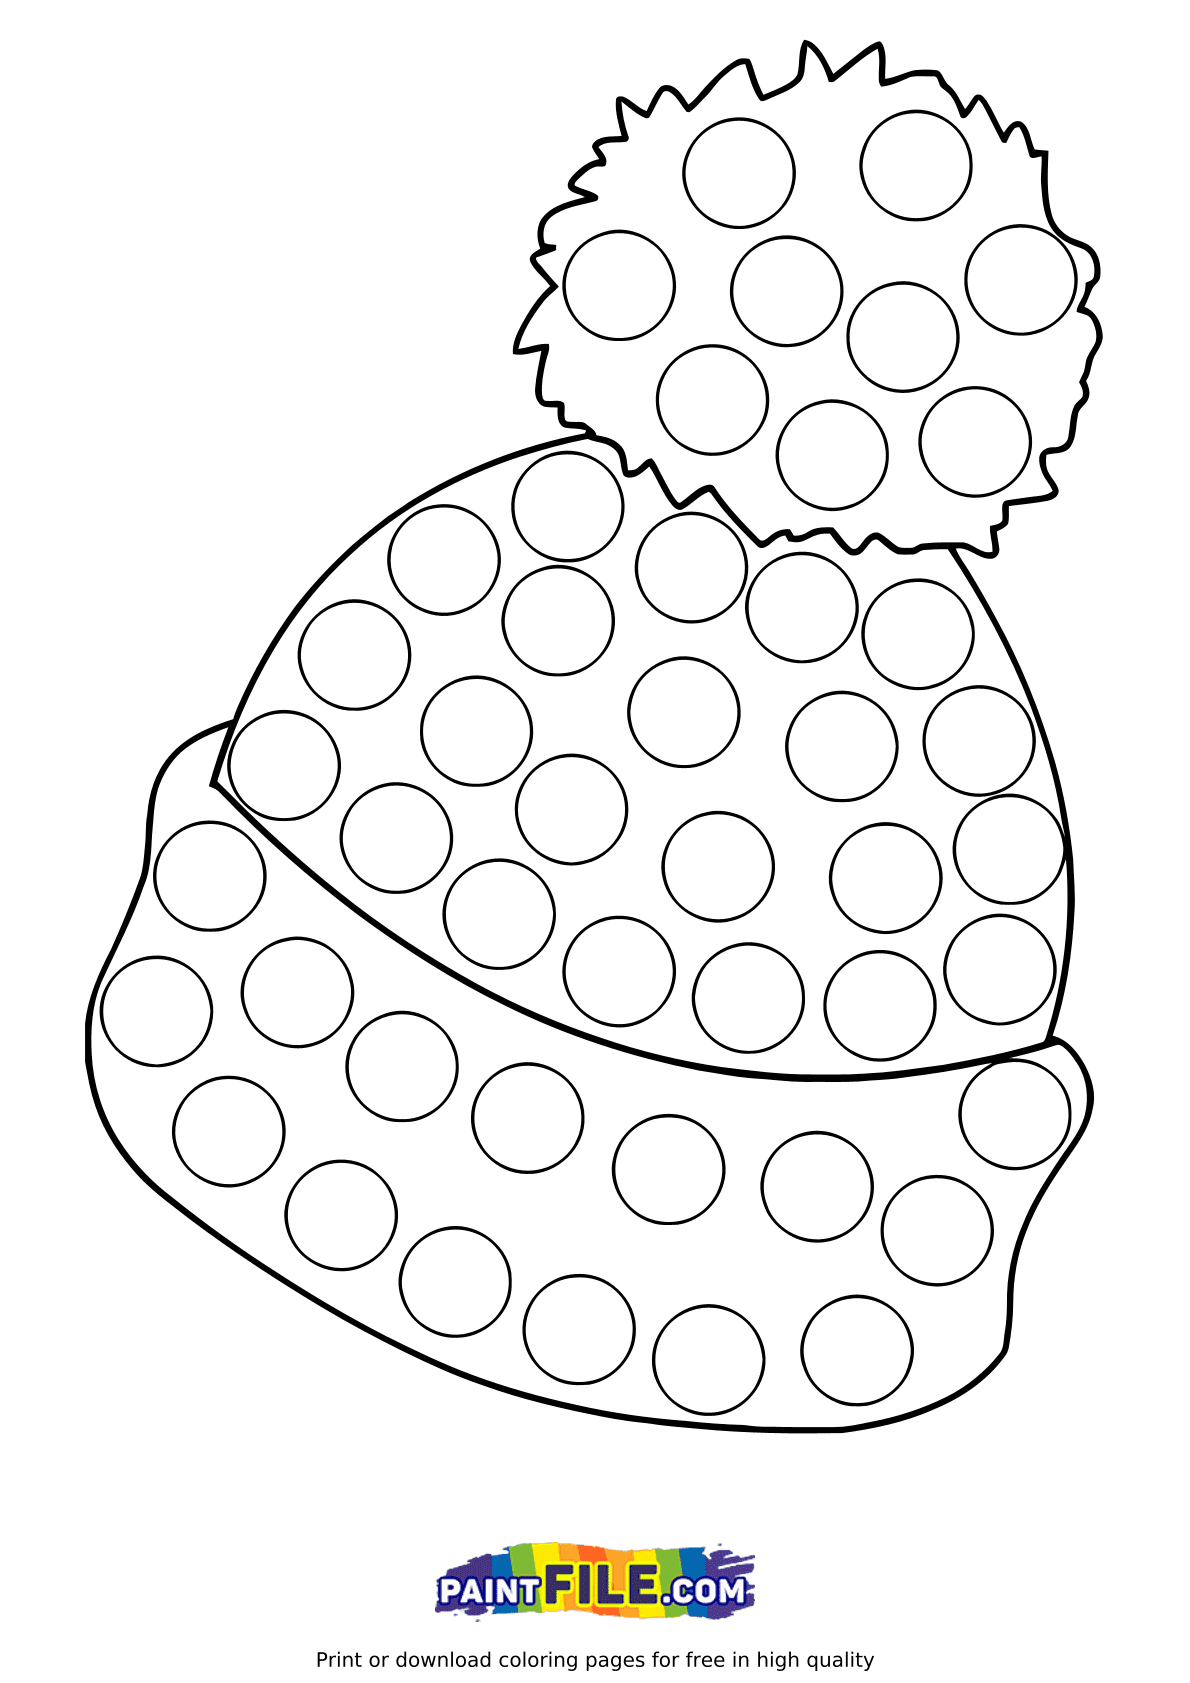 Pop it Winter Hat Coloring Page